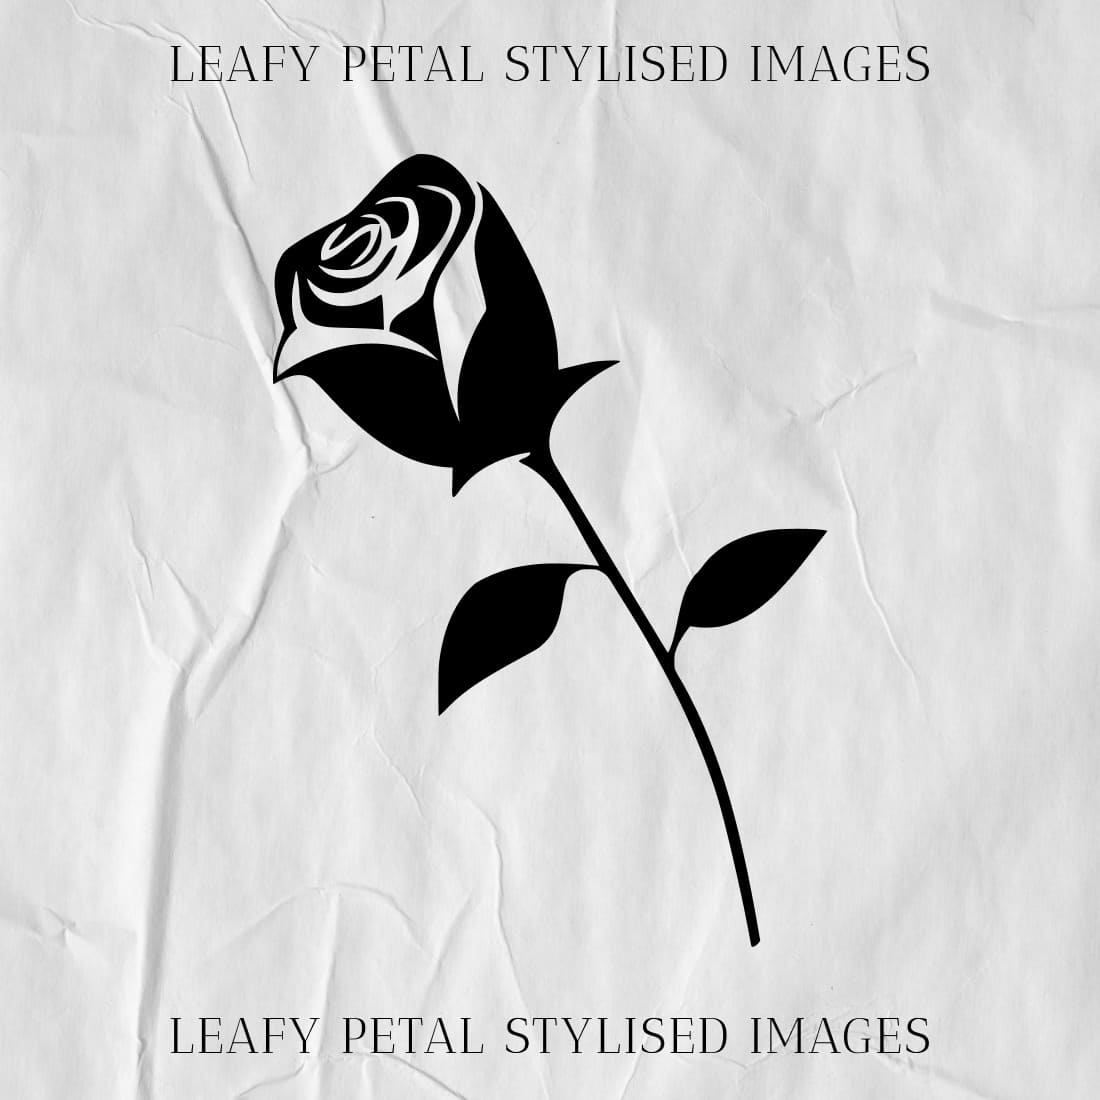 leafy petal stylised images cover image.